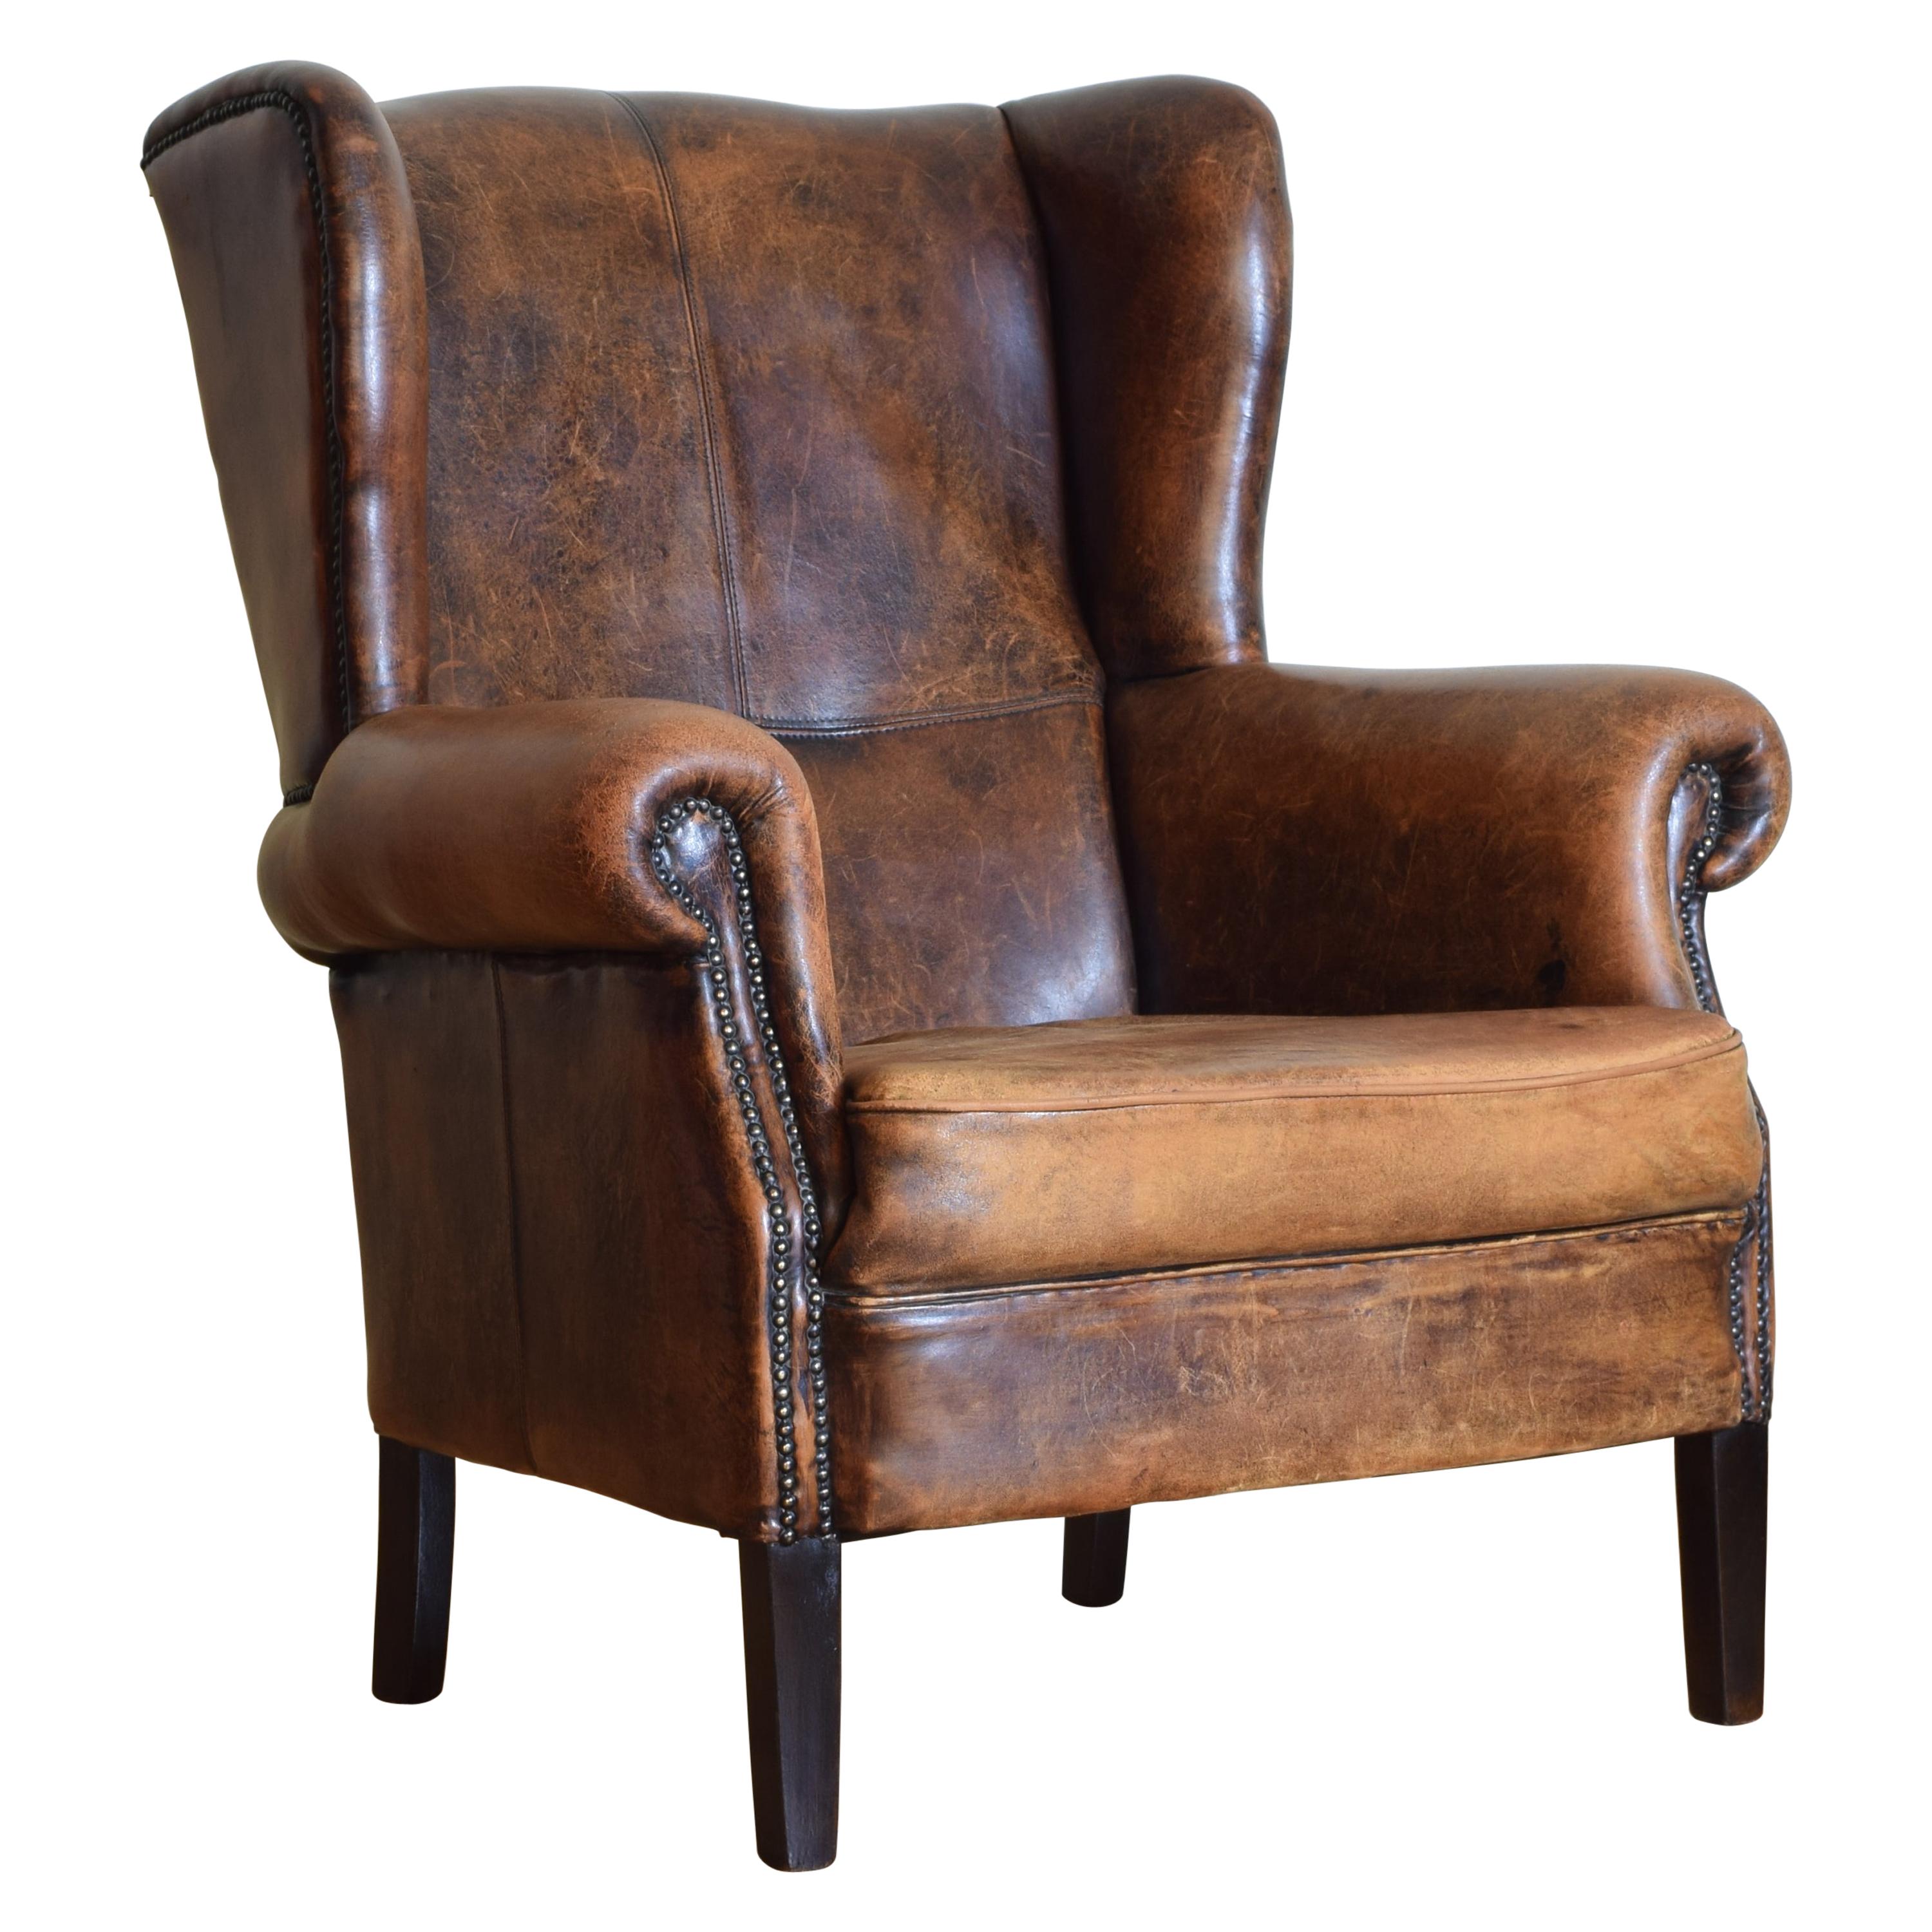 French Mahogany and Sheepskin Upholstered Wingback Chair, 20th Century